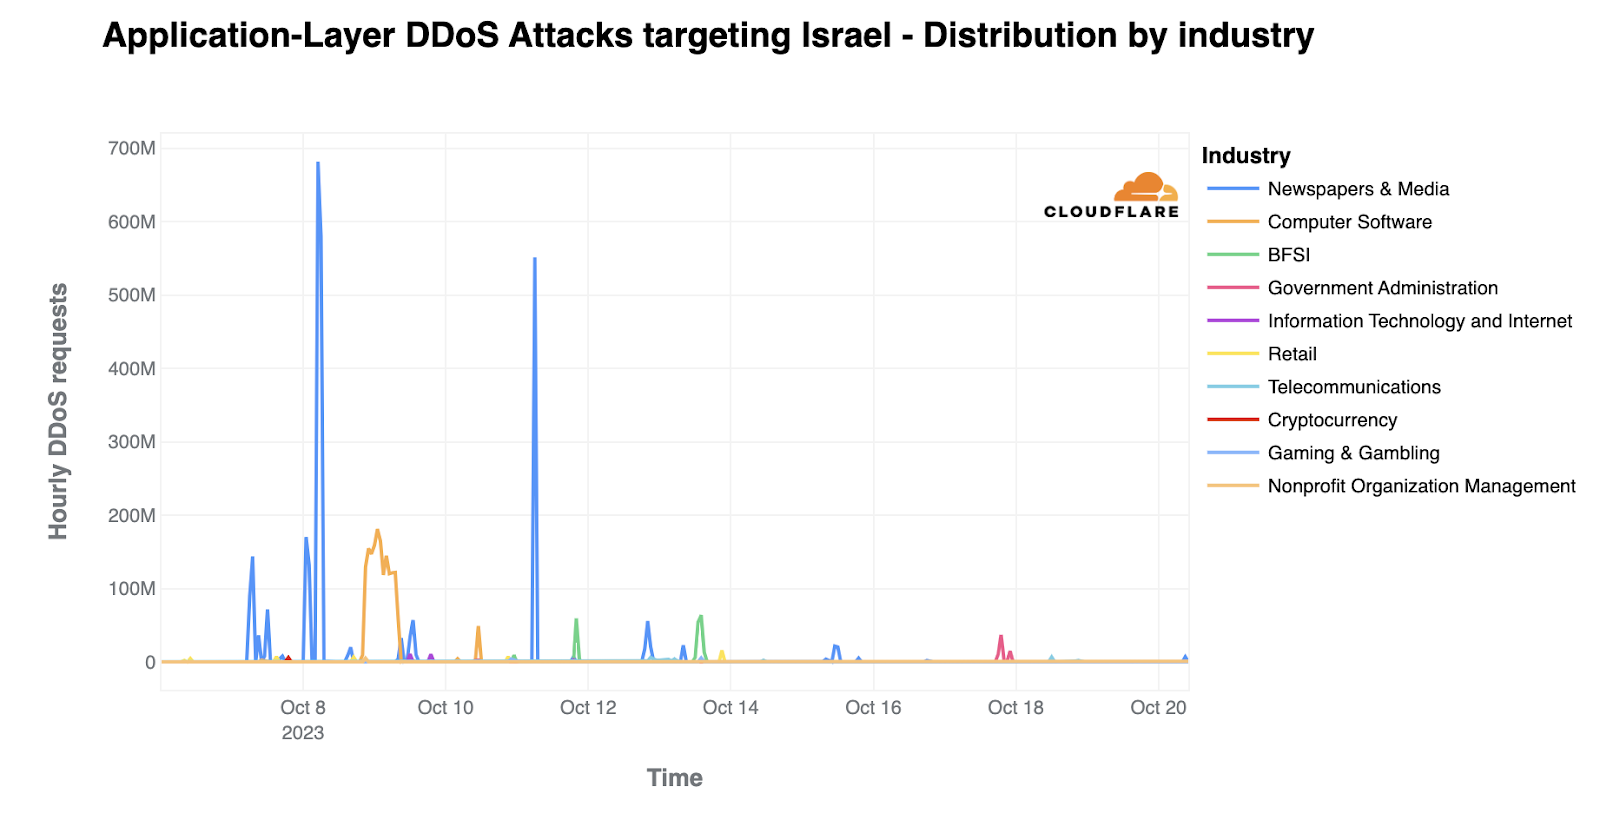 HTTP DDoS attacks against Israeli websites using Cloudflare by industry